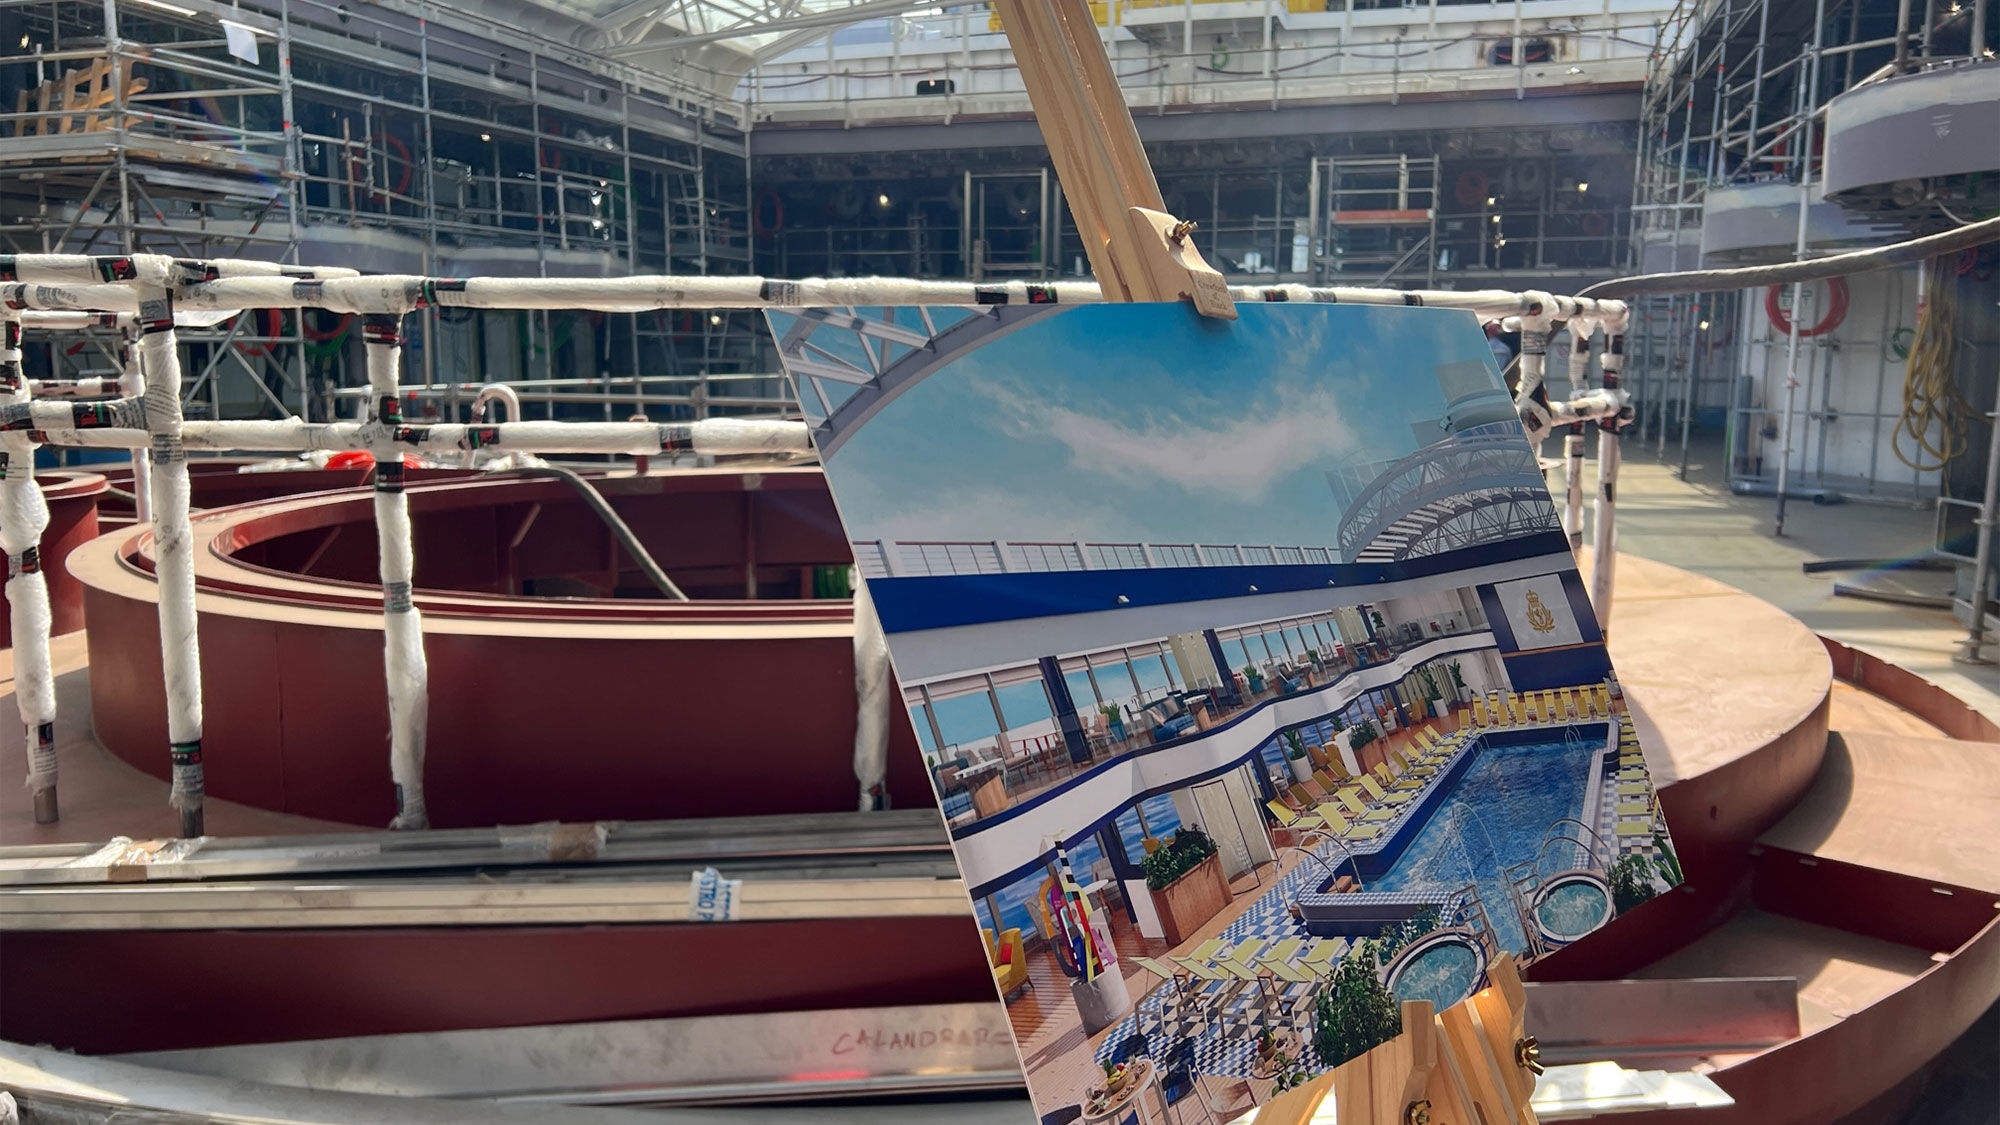 A rendering on an easel shows what the Queen Anne’s midship pool area will look like.